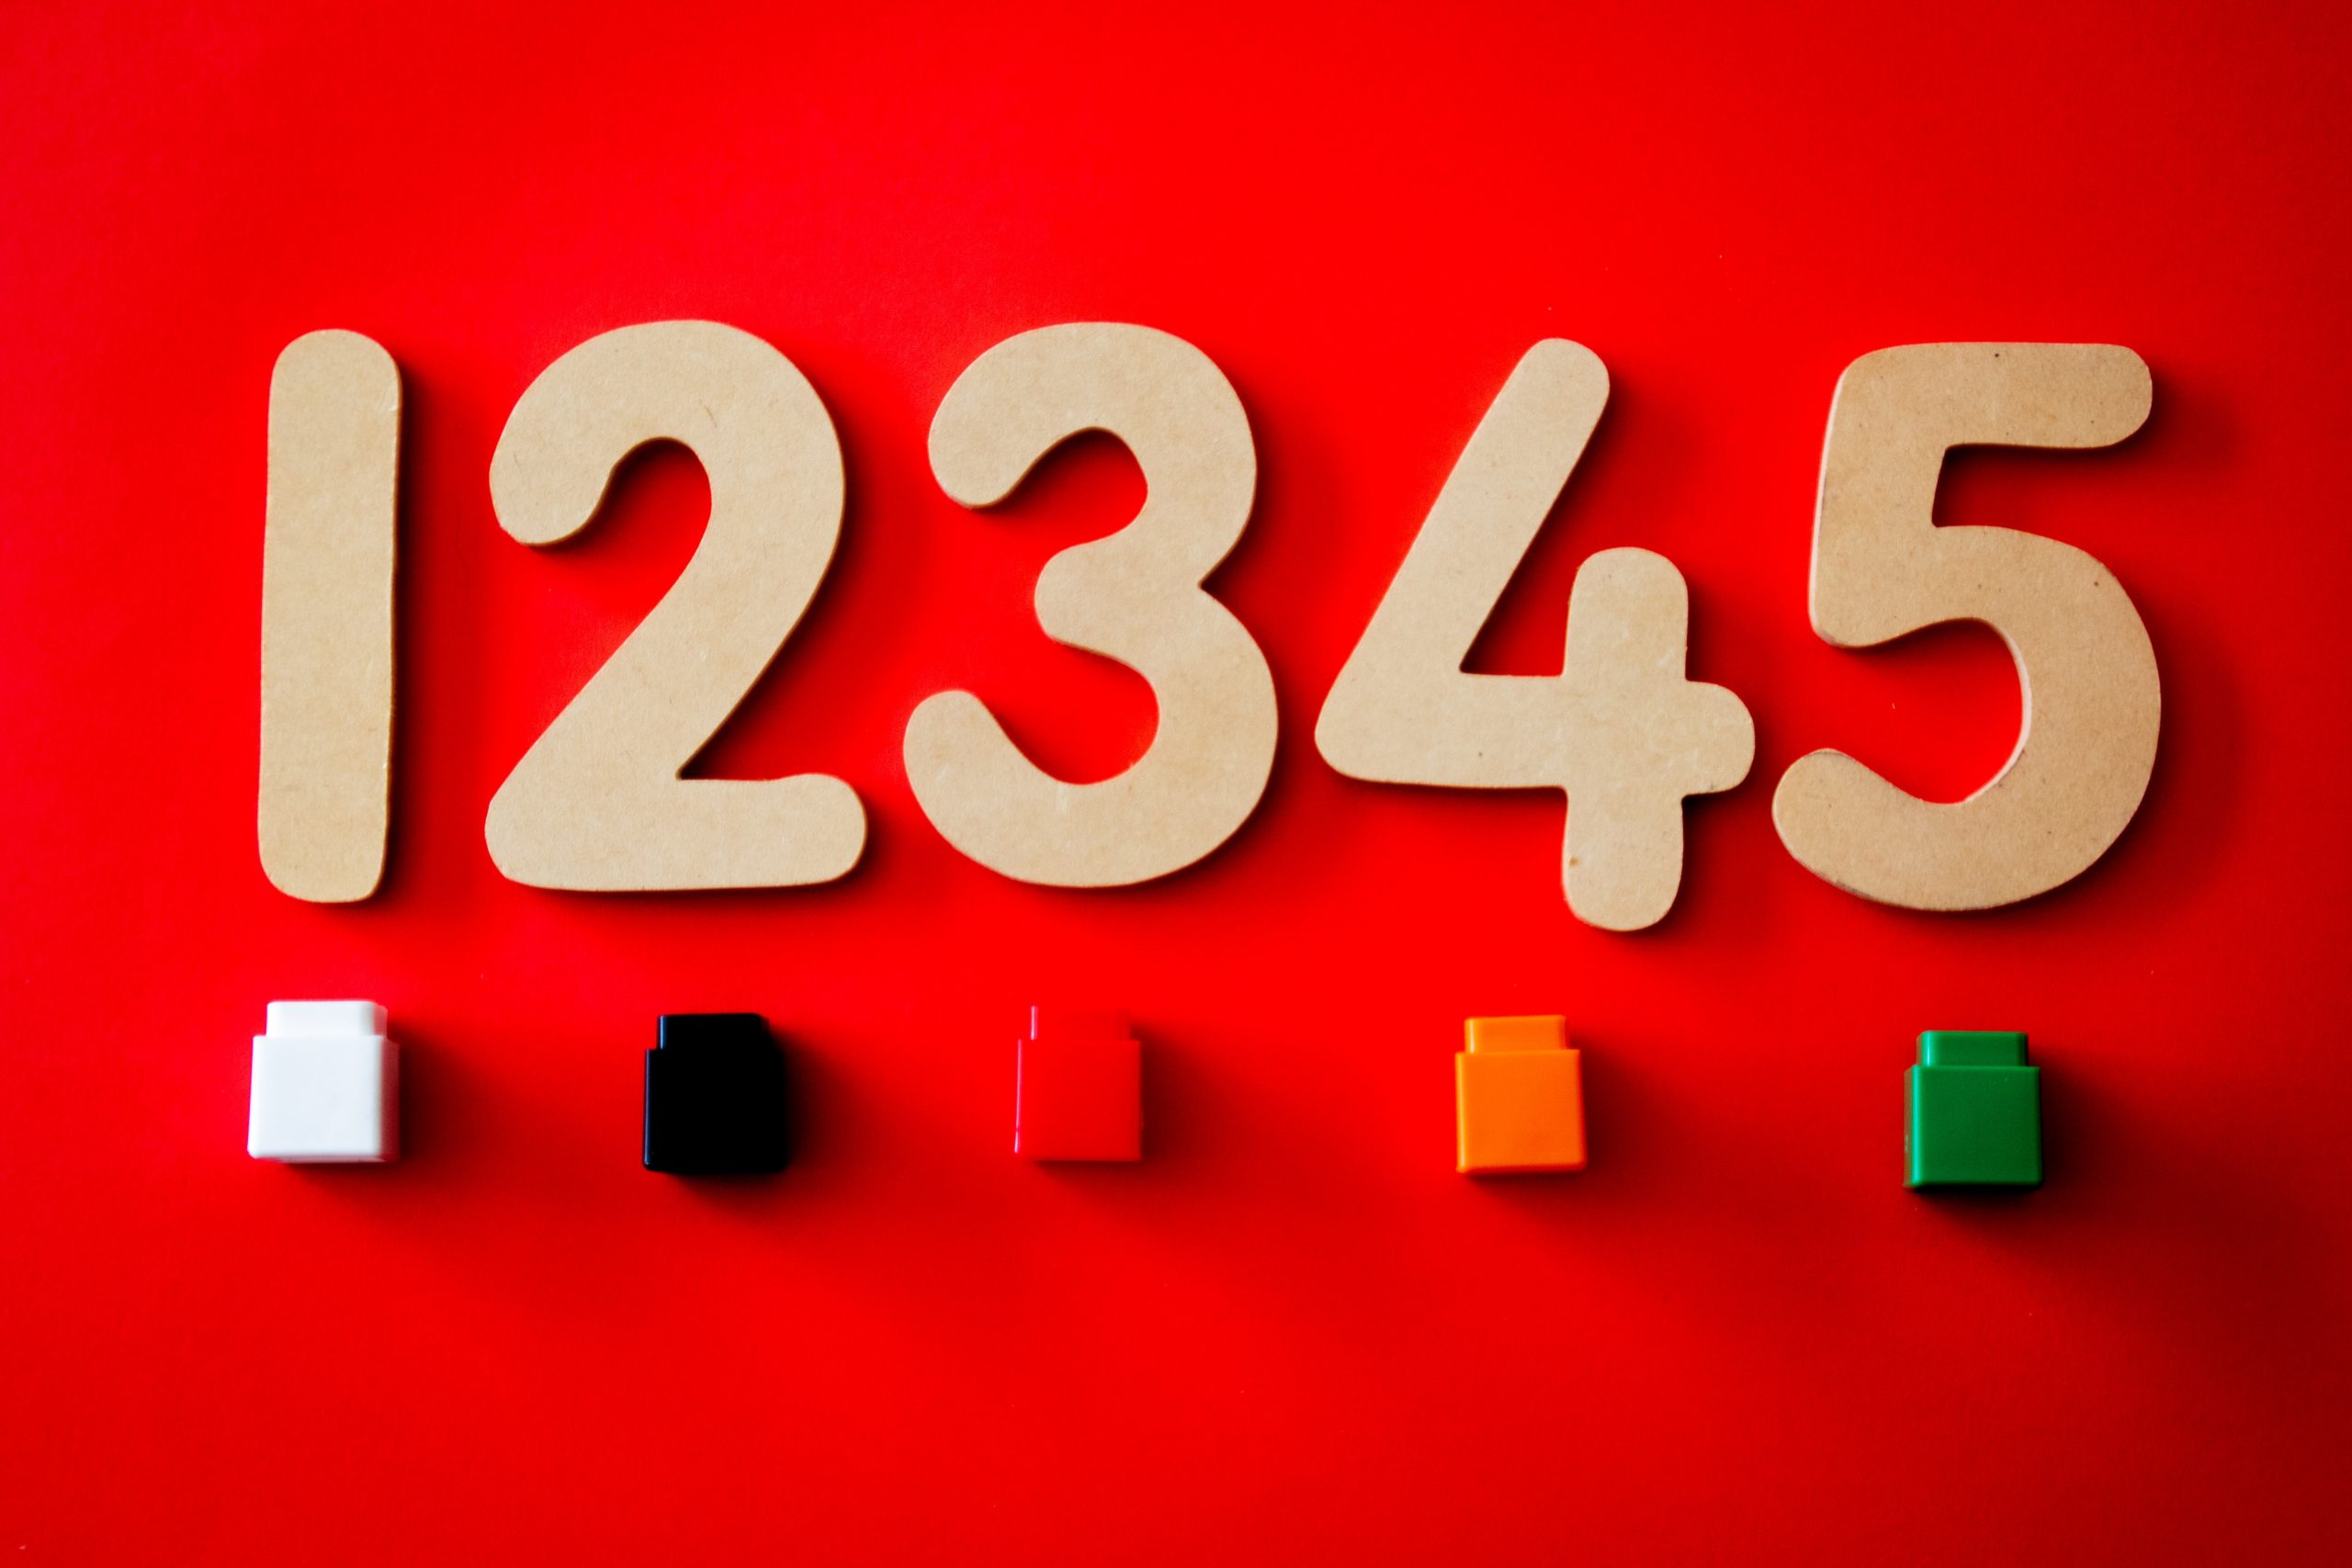 Image of numbers 1, 2, 3, 4, 5 with multicolored squares below each number; symbolizing steps to getting started